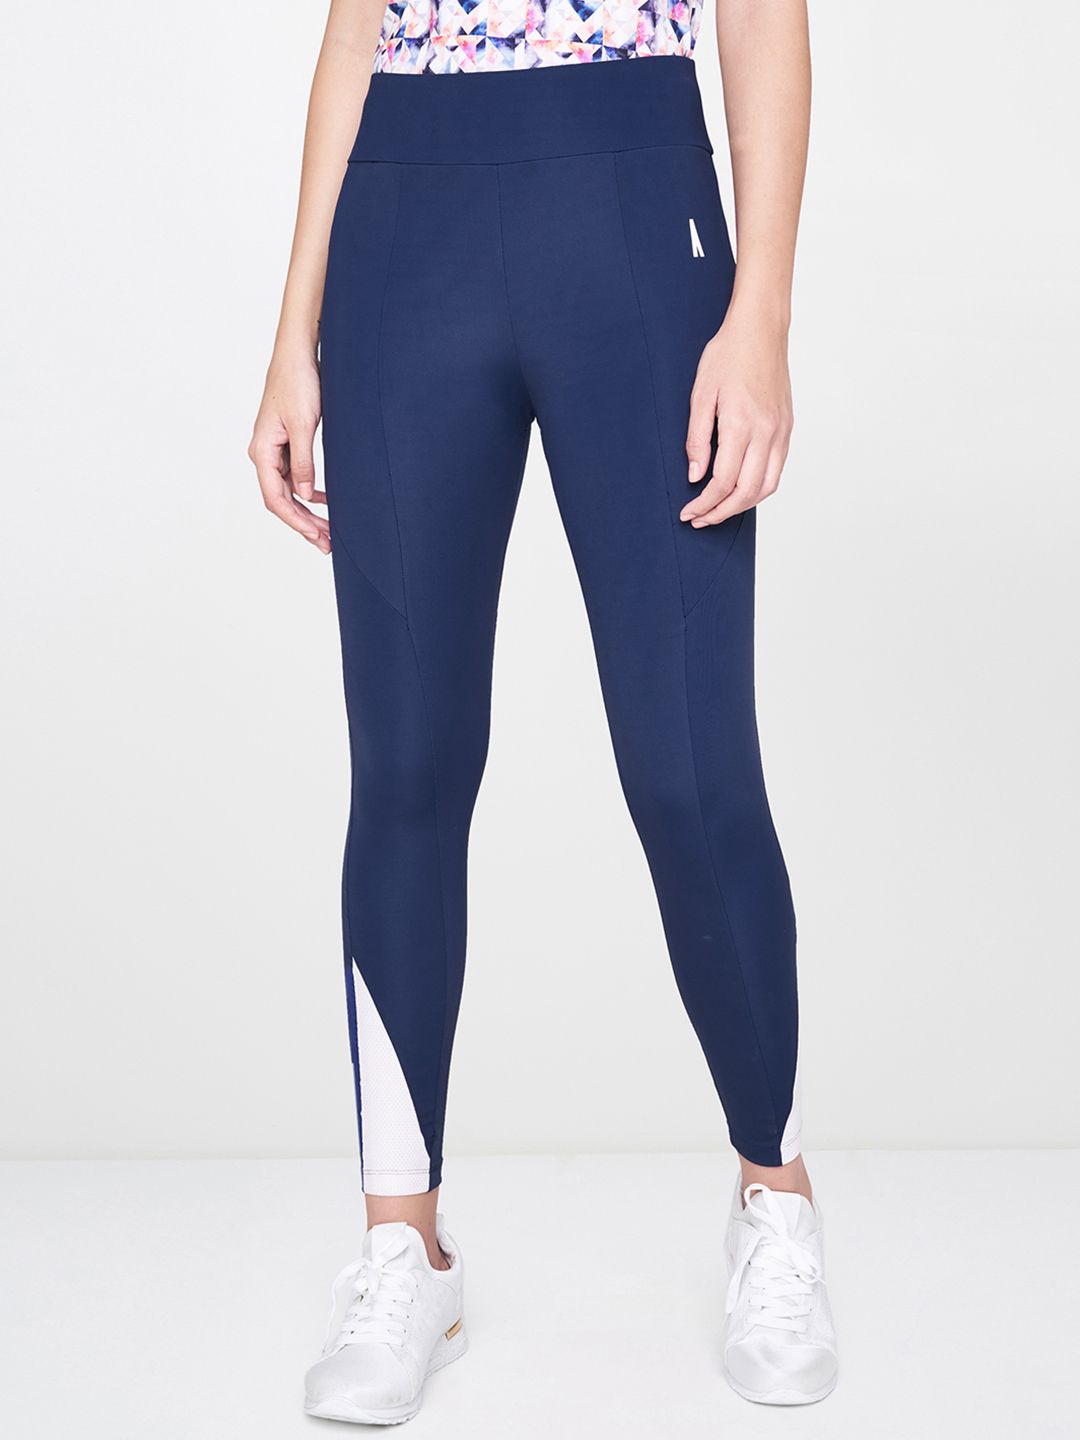 AND Women Navy Blue Solid Activewear Tights Price in India